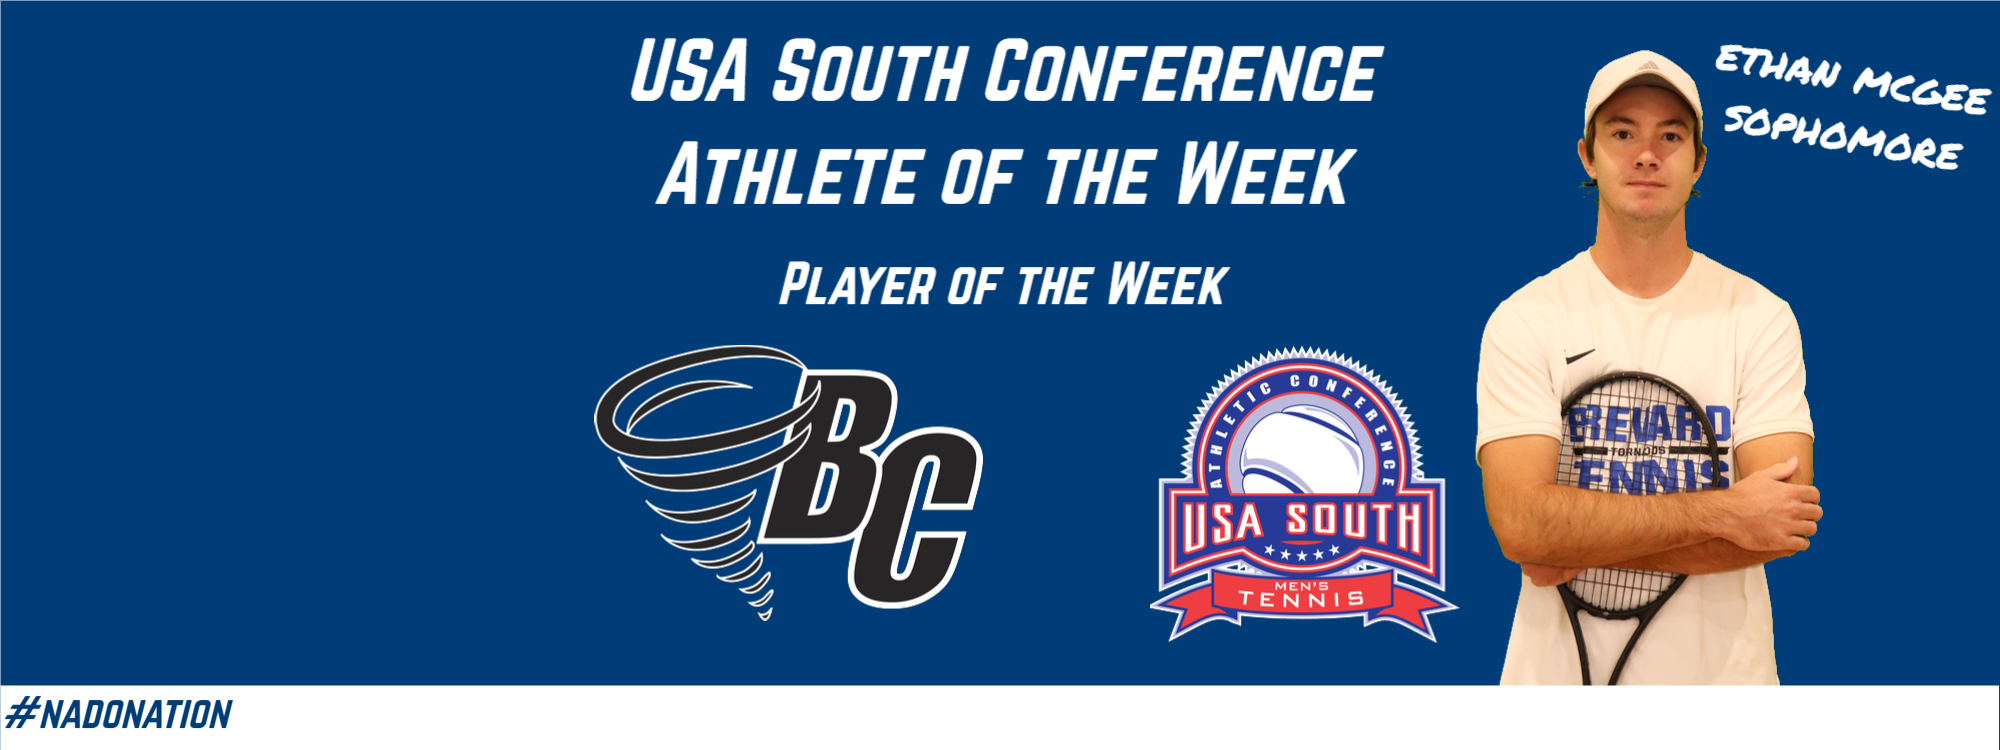 McGee Takes Home USA South Player of the Week Honor